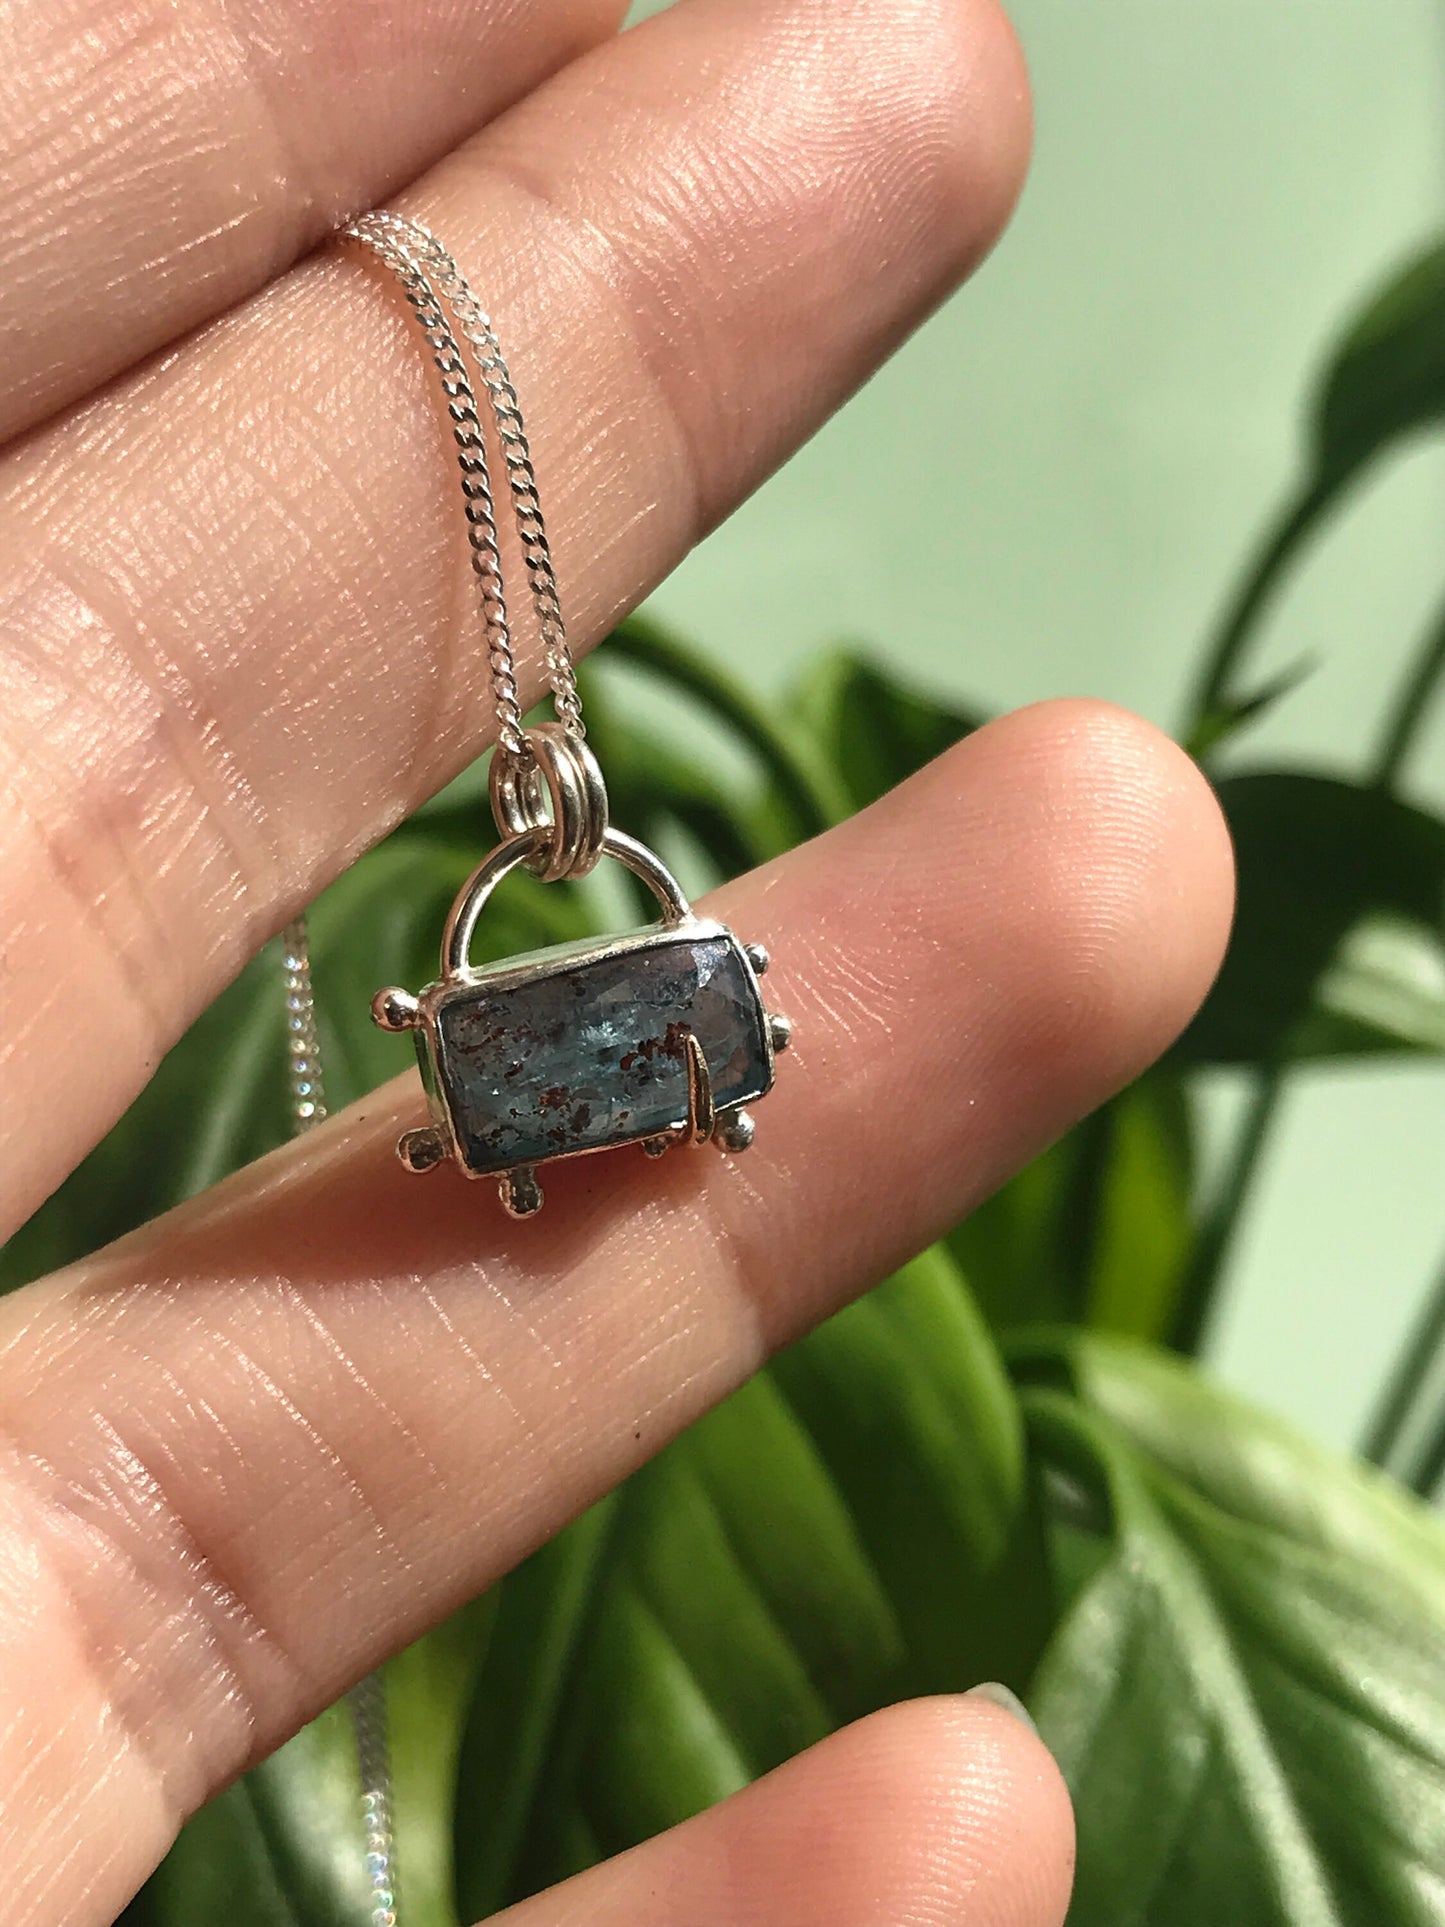 Teal Moss Kyanite and Sterling Silver Pendant Necklace with Granulation and 9ct Gold Claw Detail